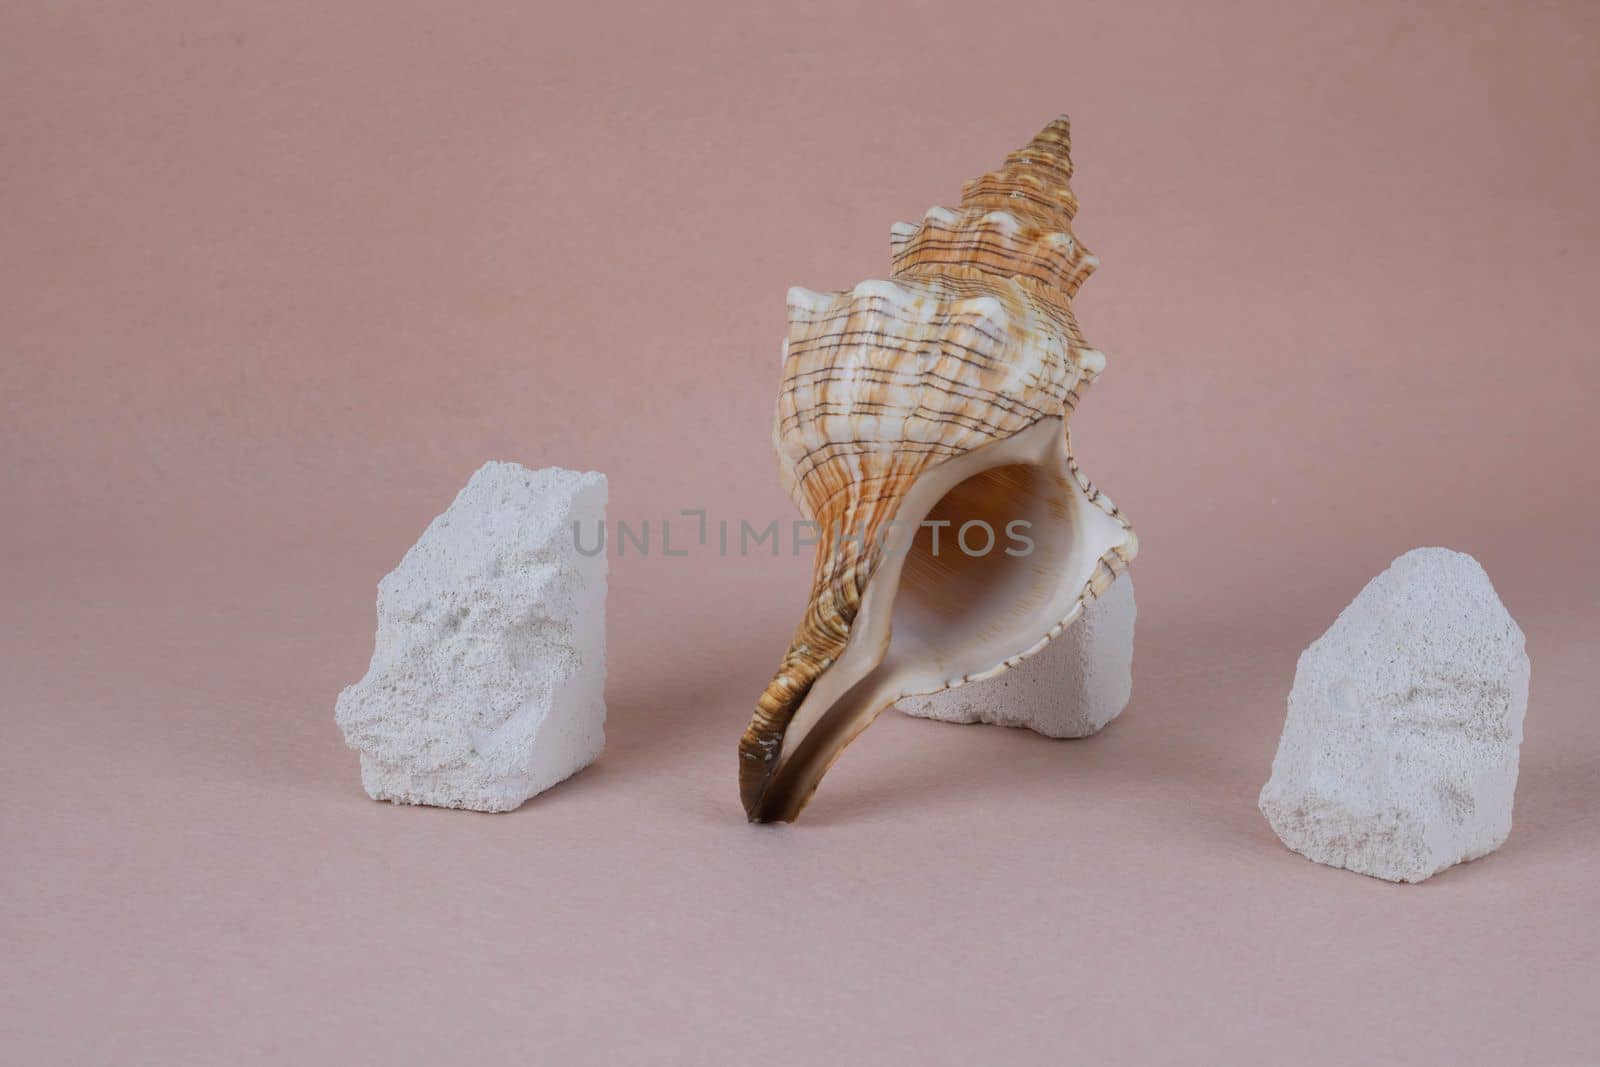 A large shell and white fragments of stones on a pink background by lapushka62